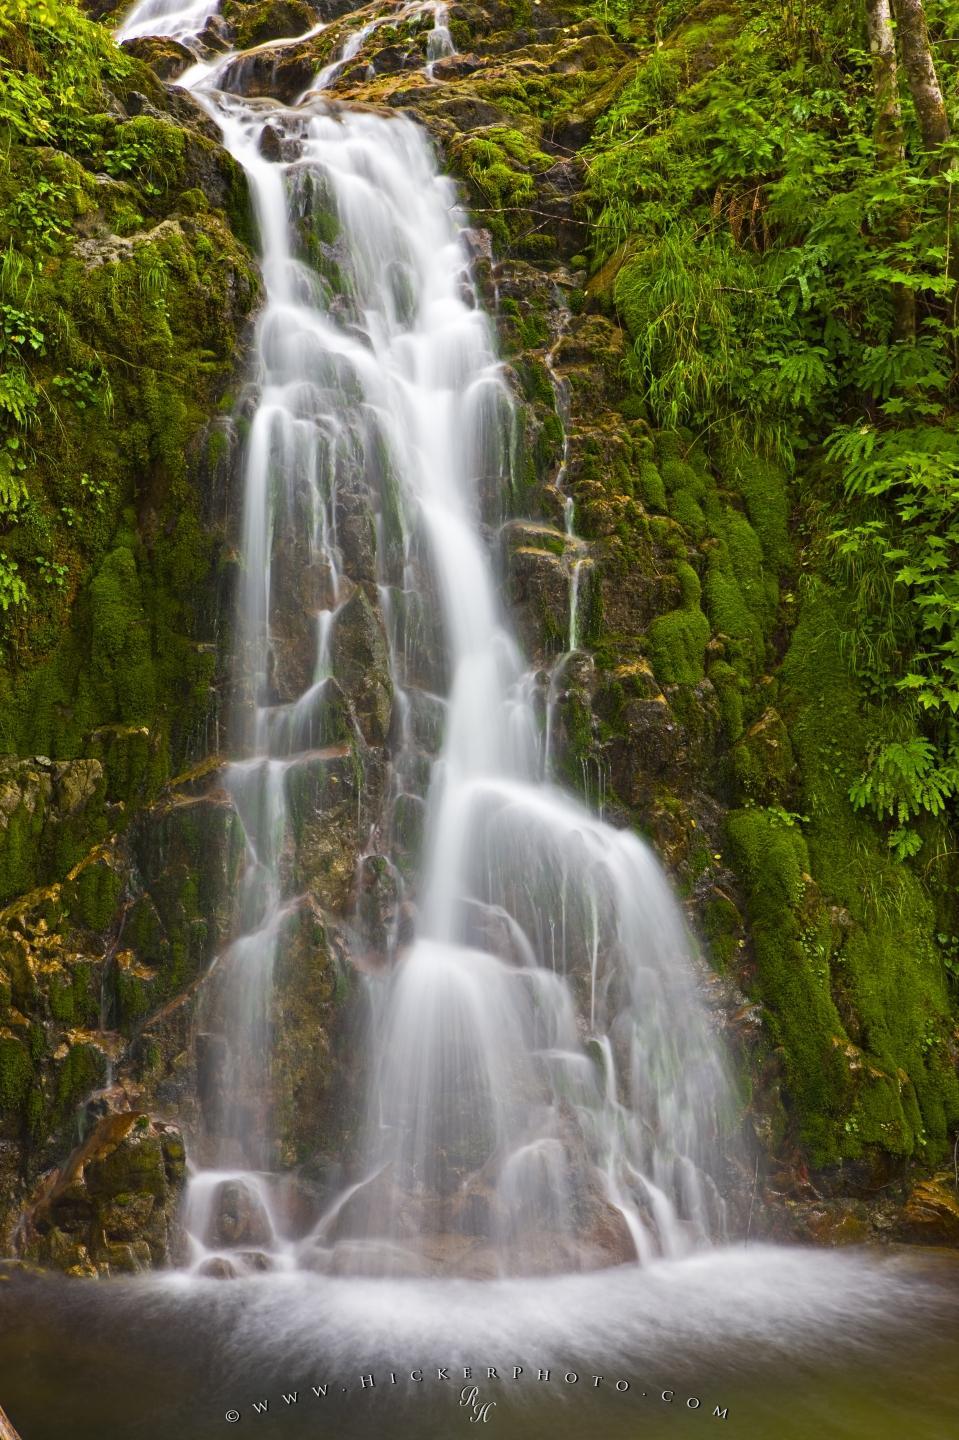 Free wallpaper background: Rainforest Waterfall Picture Northern